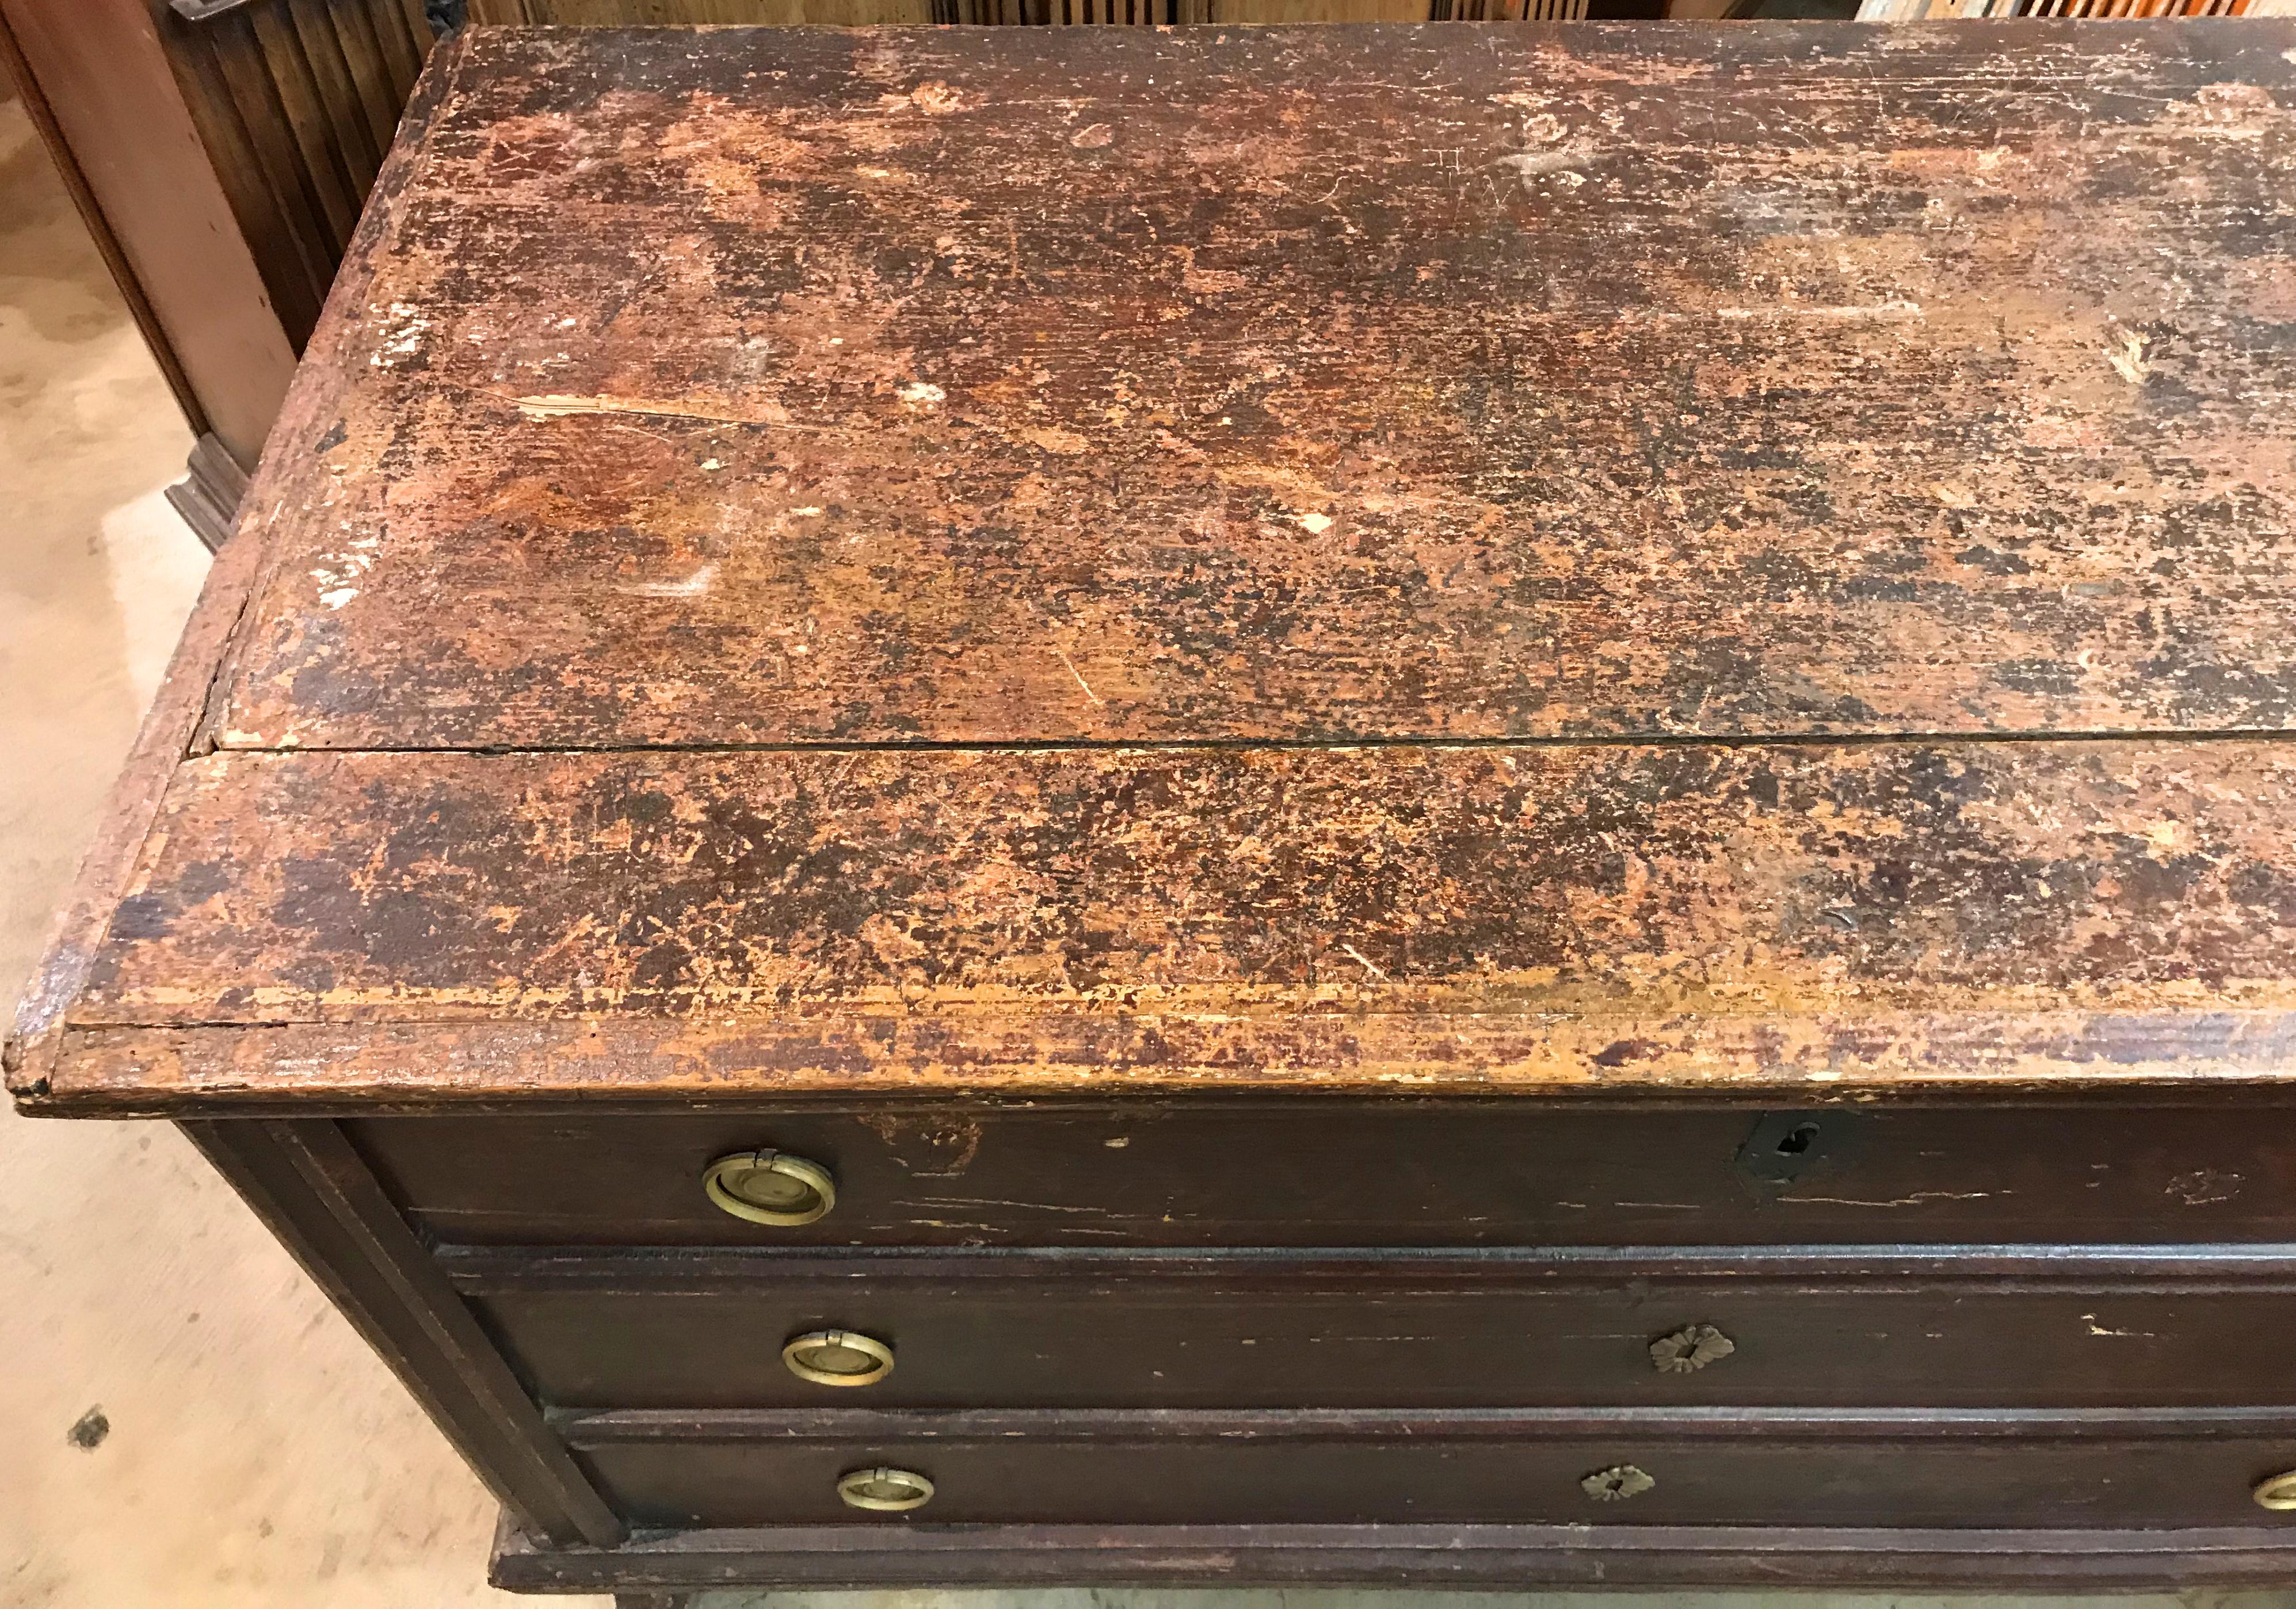 A rustic early 19th century Swedish footed lift top blanket chest with three faux drawer fronts, interior till, and wrought iron carrying handles. Good overall condition, with heavy top wear and paint losses, shrinkage, imperfections, and expected